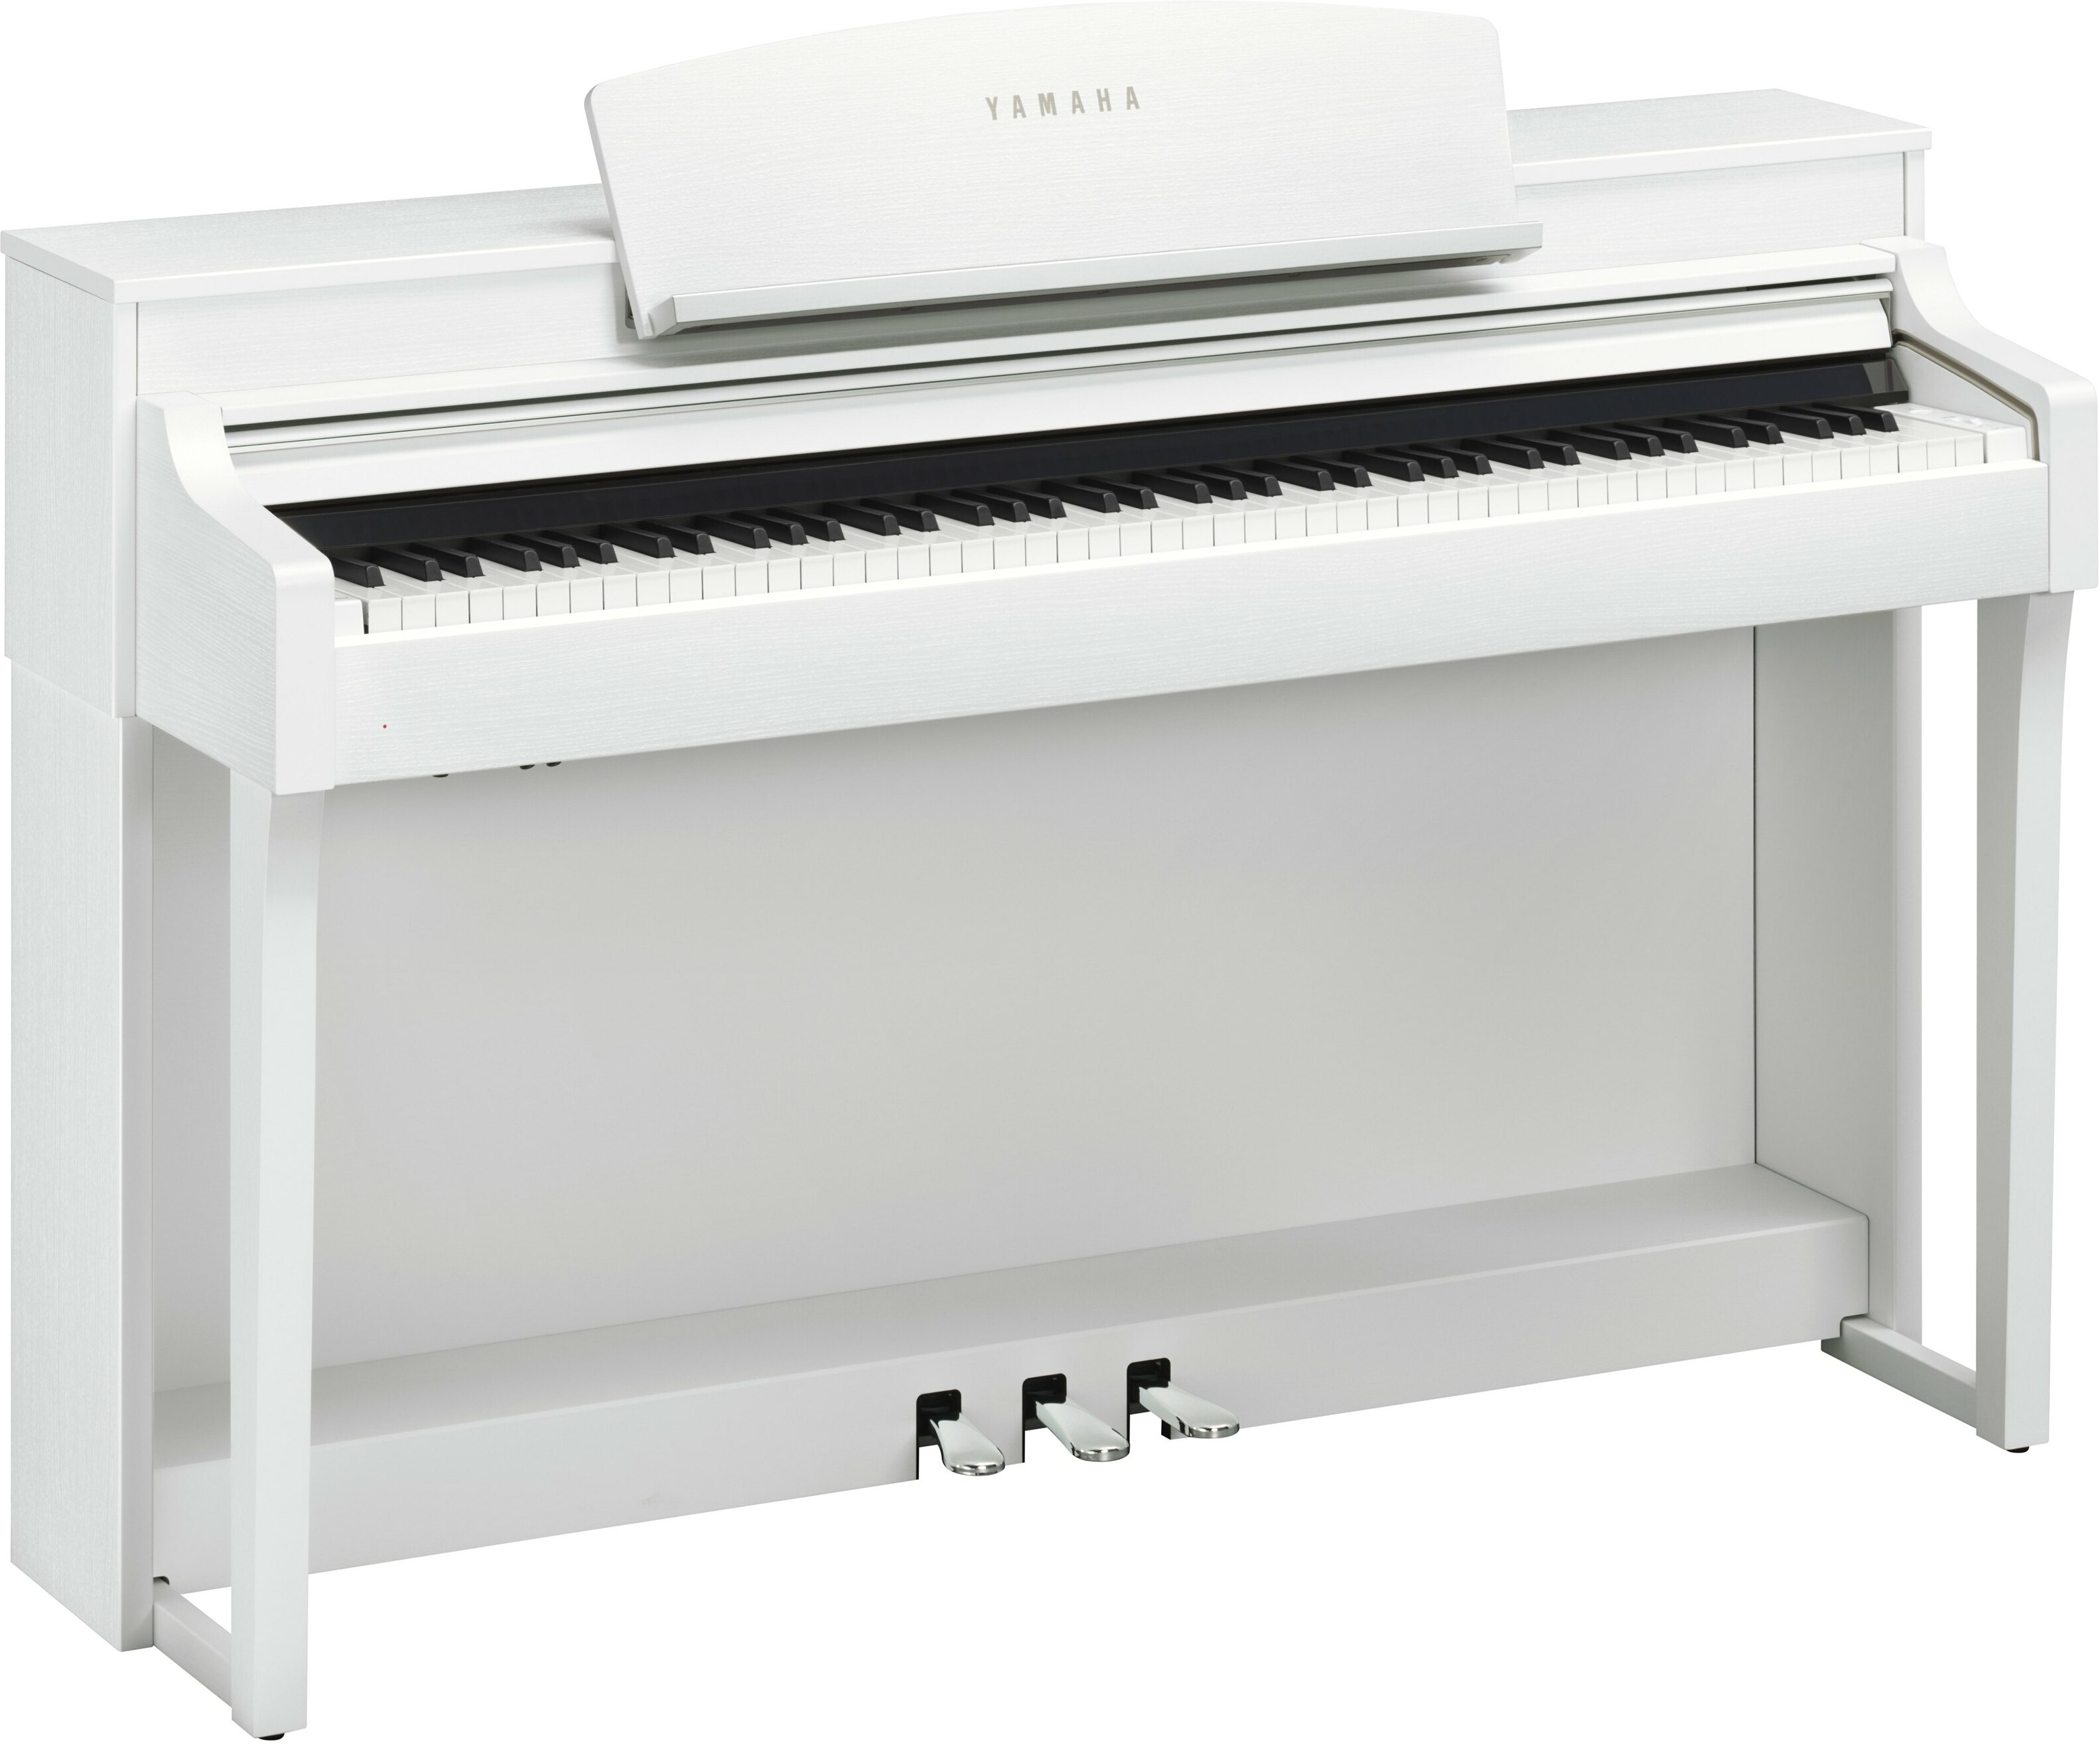 Yamaha Csp-150 - White - Digital piano with stand - Main picture